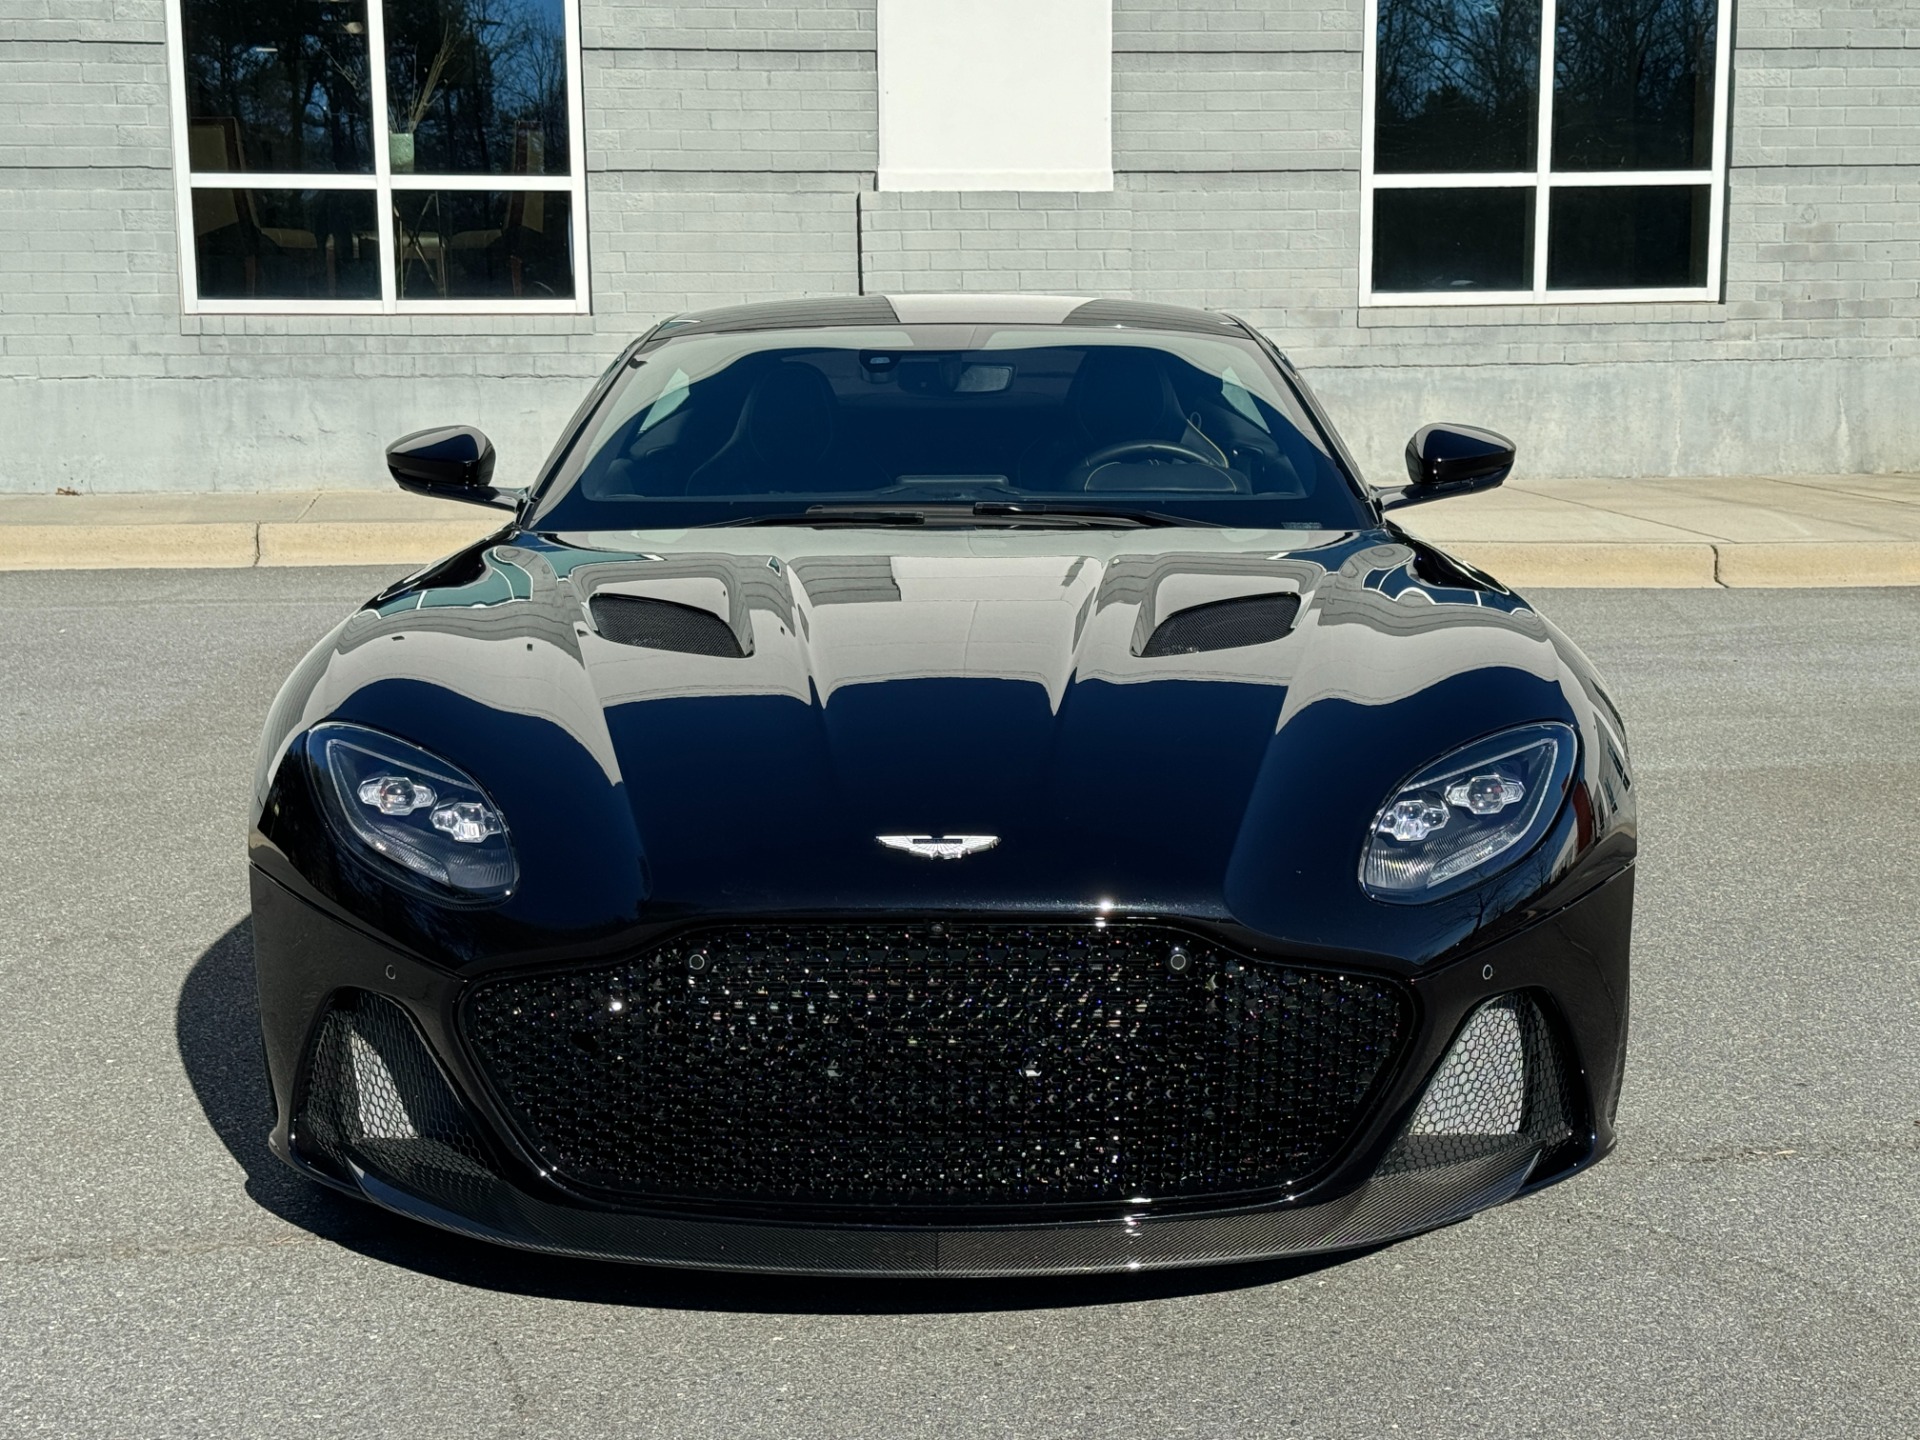 Used 2020 Aston Martin DBS SUPERLEGGERA / CARBON FIBER / V12 750HP / ACCENT STITCHING for sale $240,000 at Formula Imports in Charlotte NC 28227 2